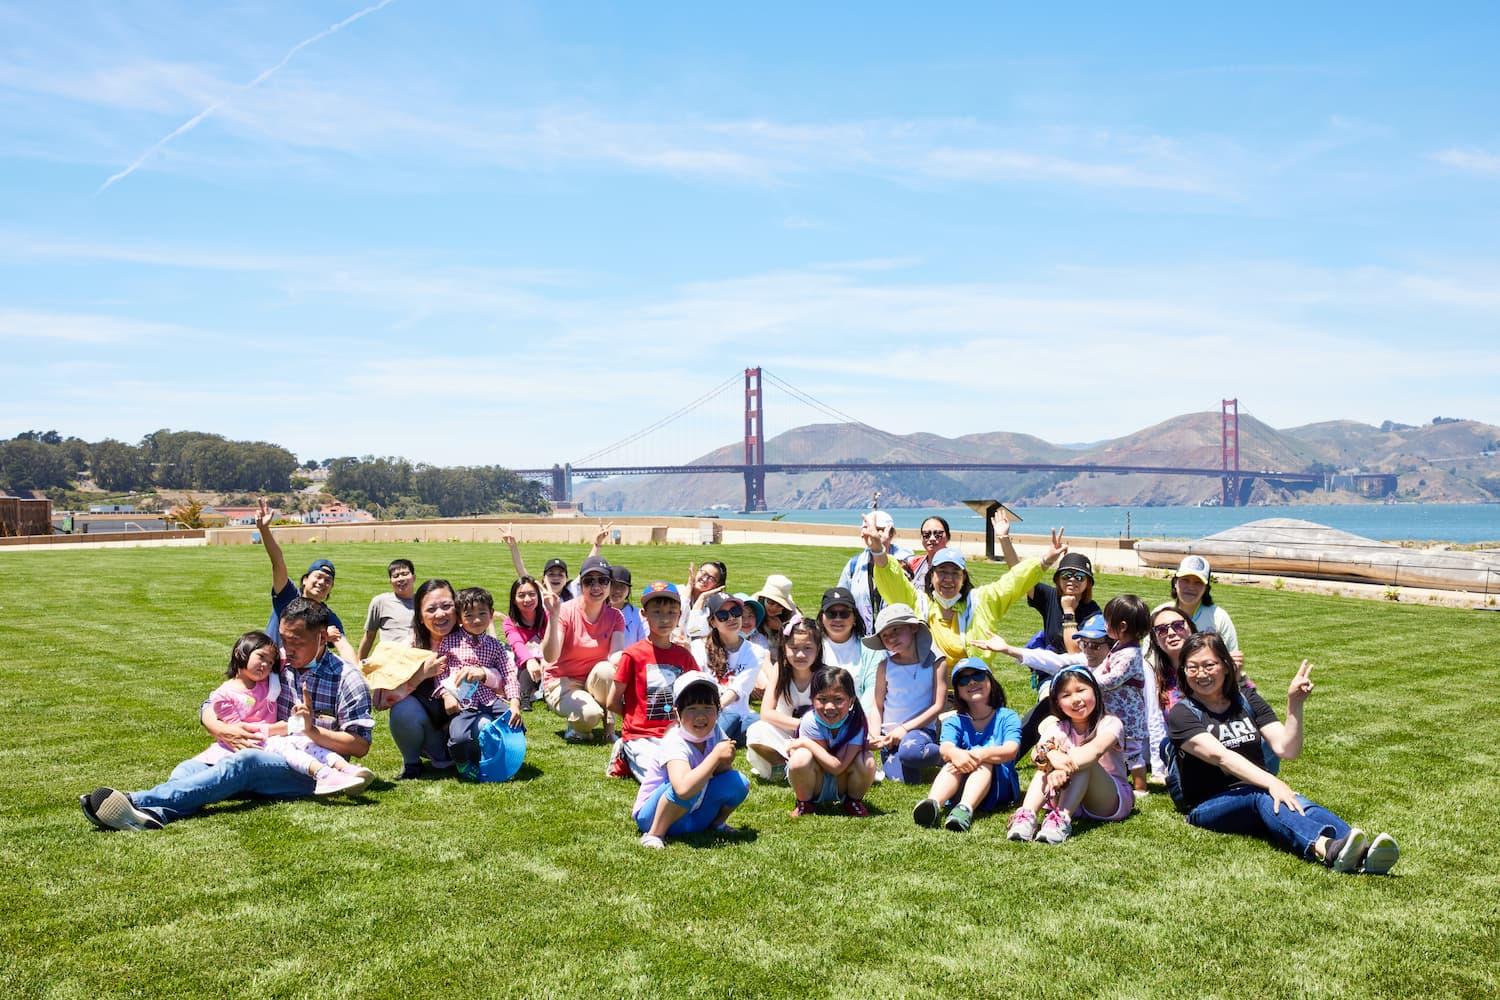 A group of kids on a lawn at Presidio Tunnel Tops. Photo by Rachel Styer.